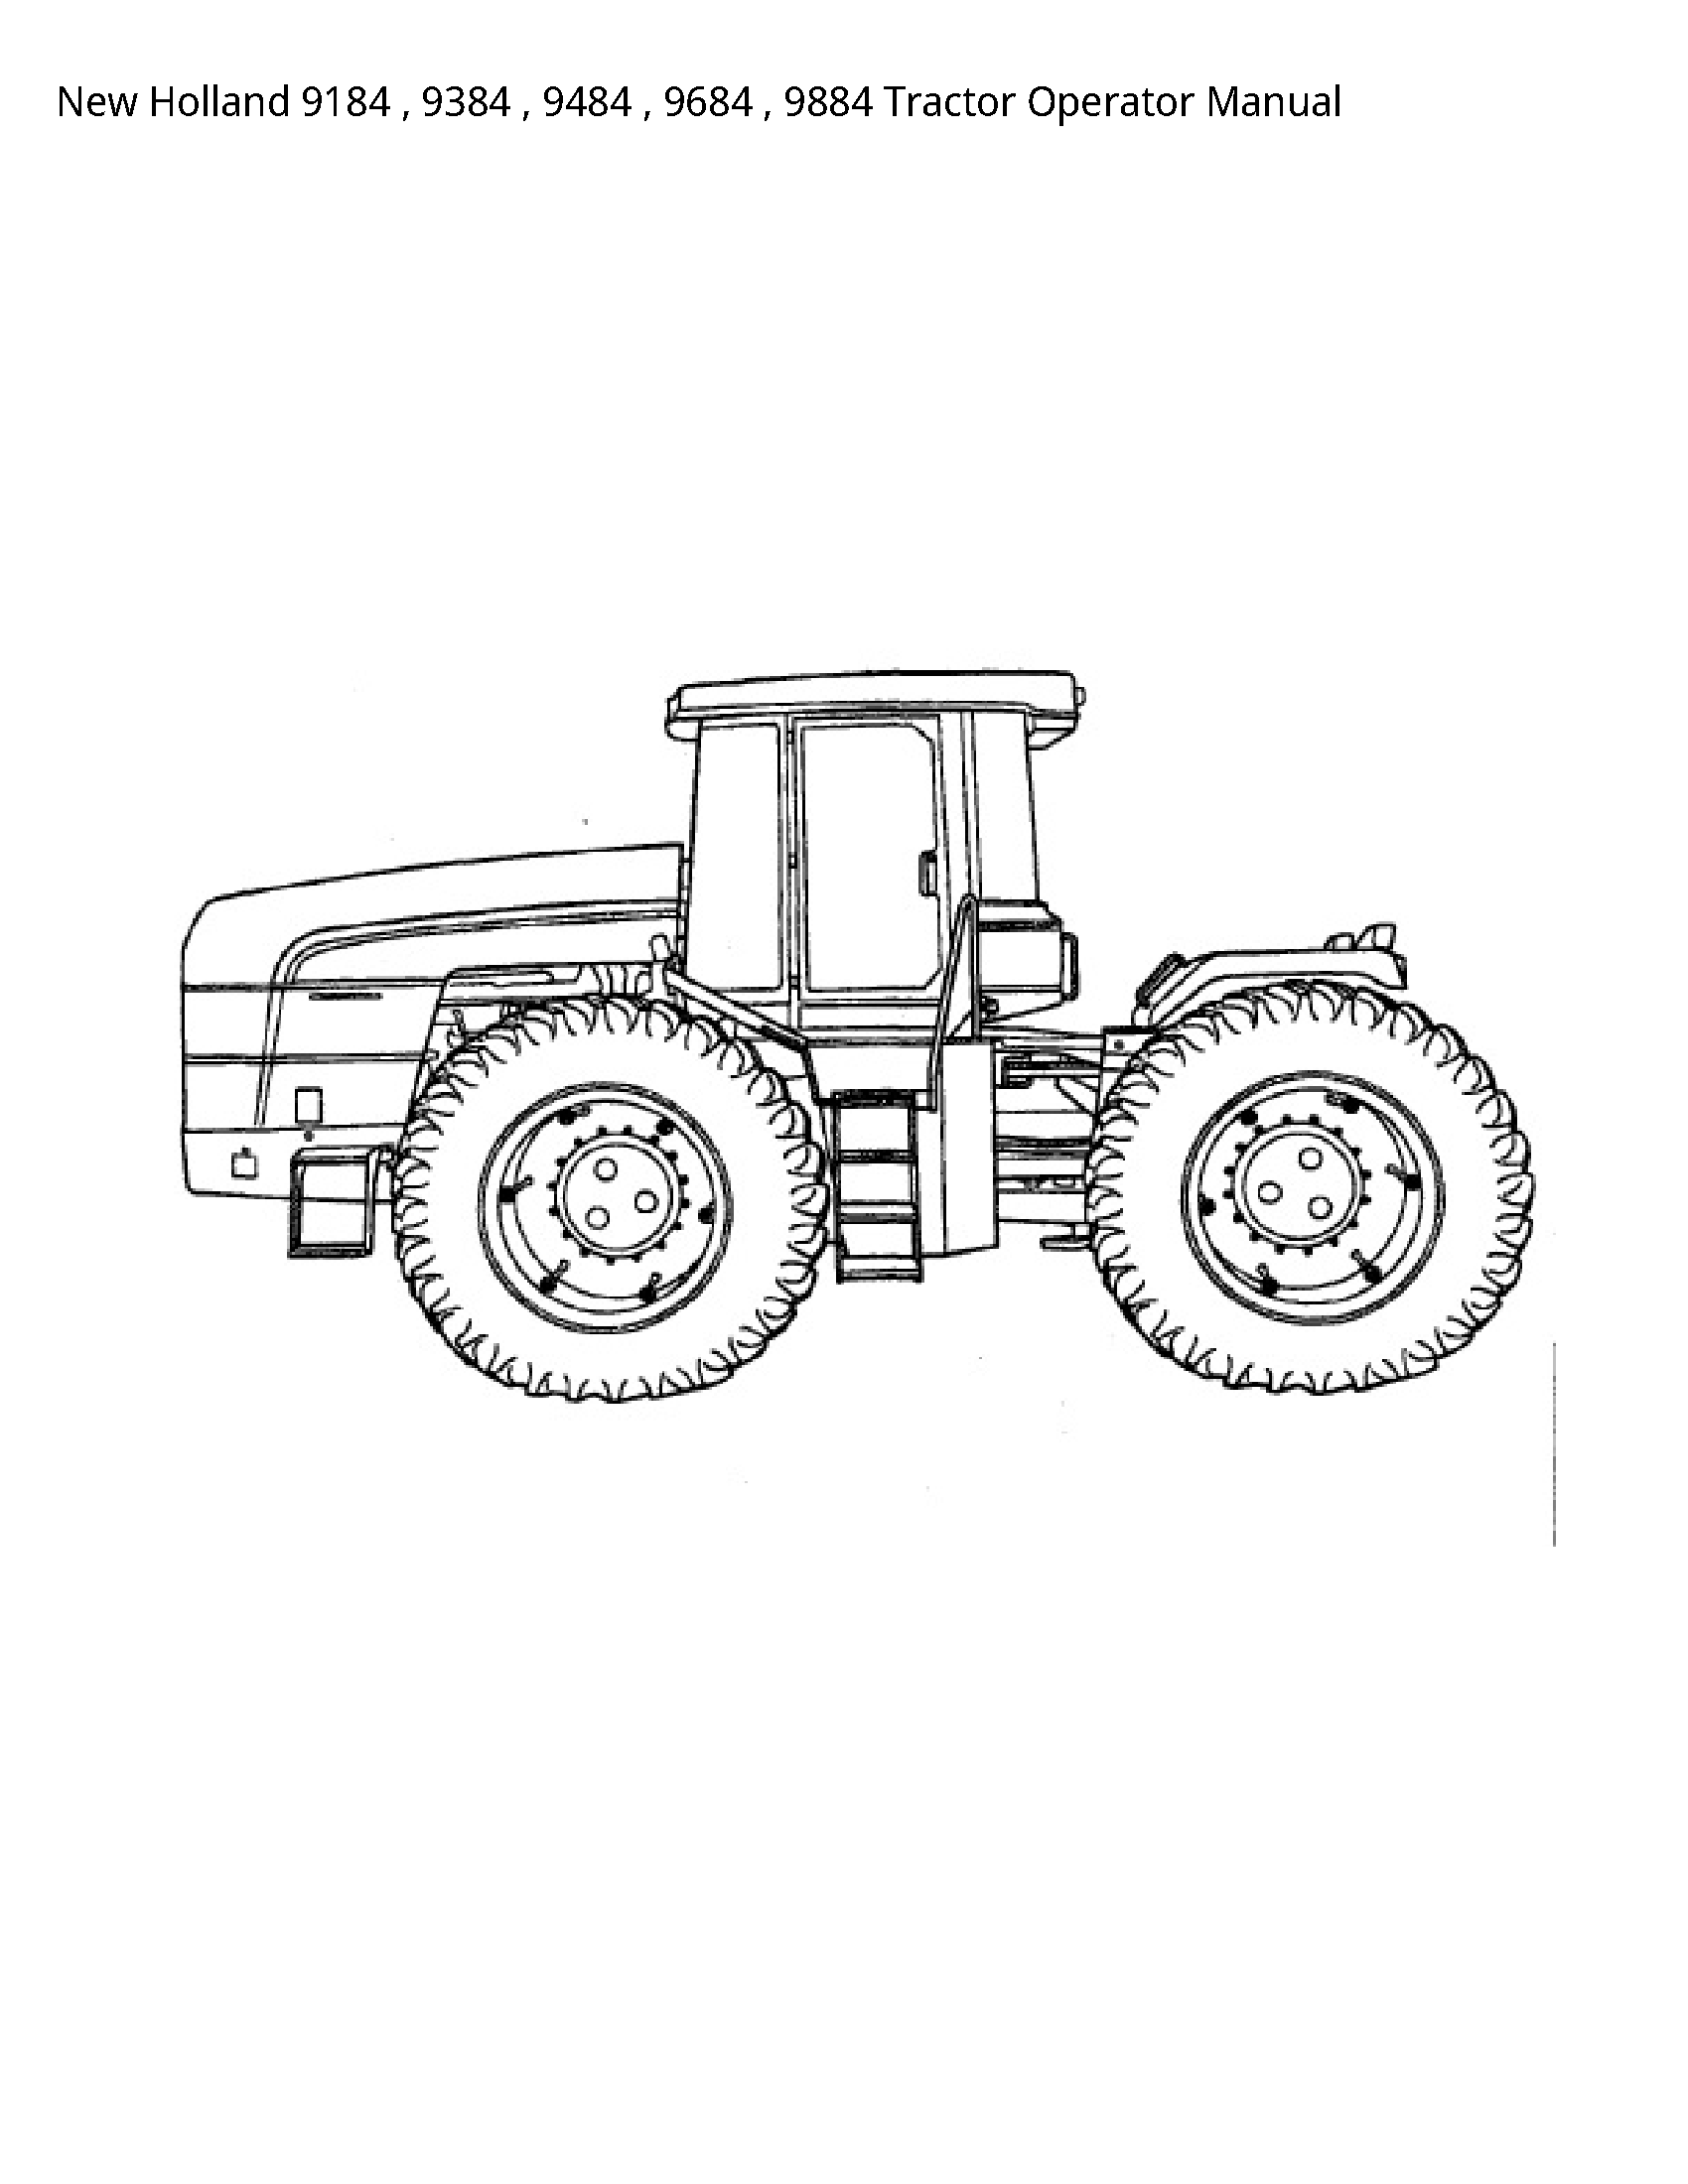 New Holland 9184 Tractor Operator manual